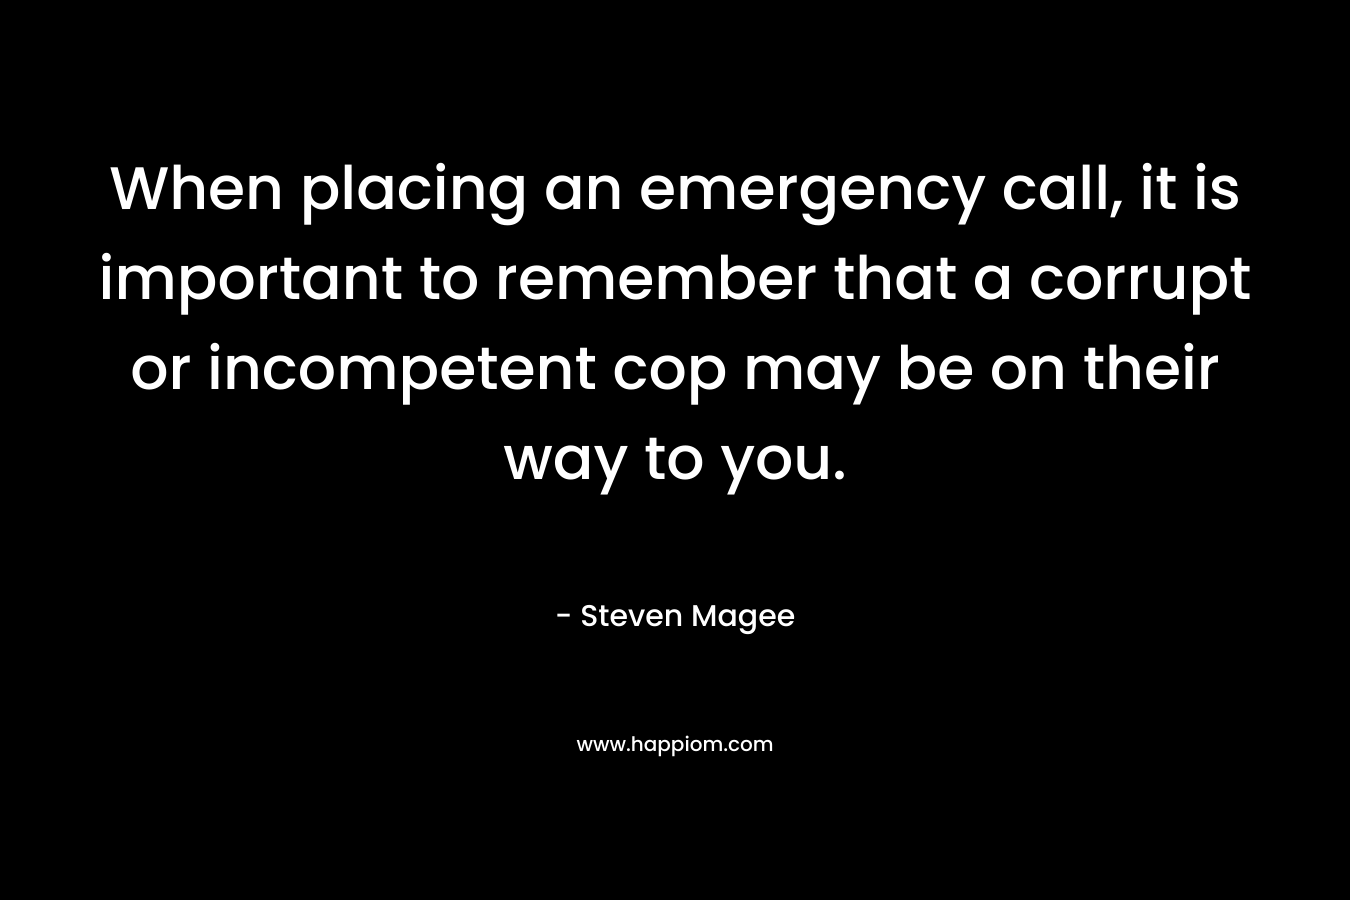 When placing an emergency call, it is important to remember that a corrupt or incompetent cop may be on their way to you.